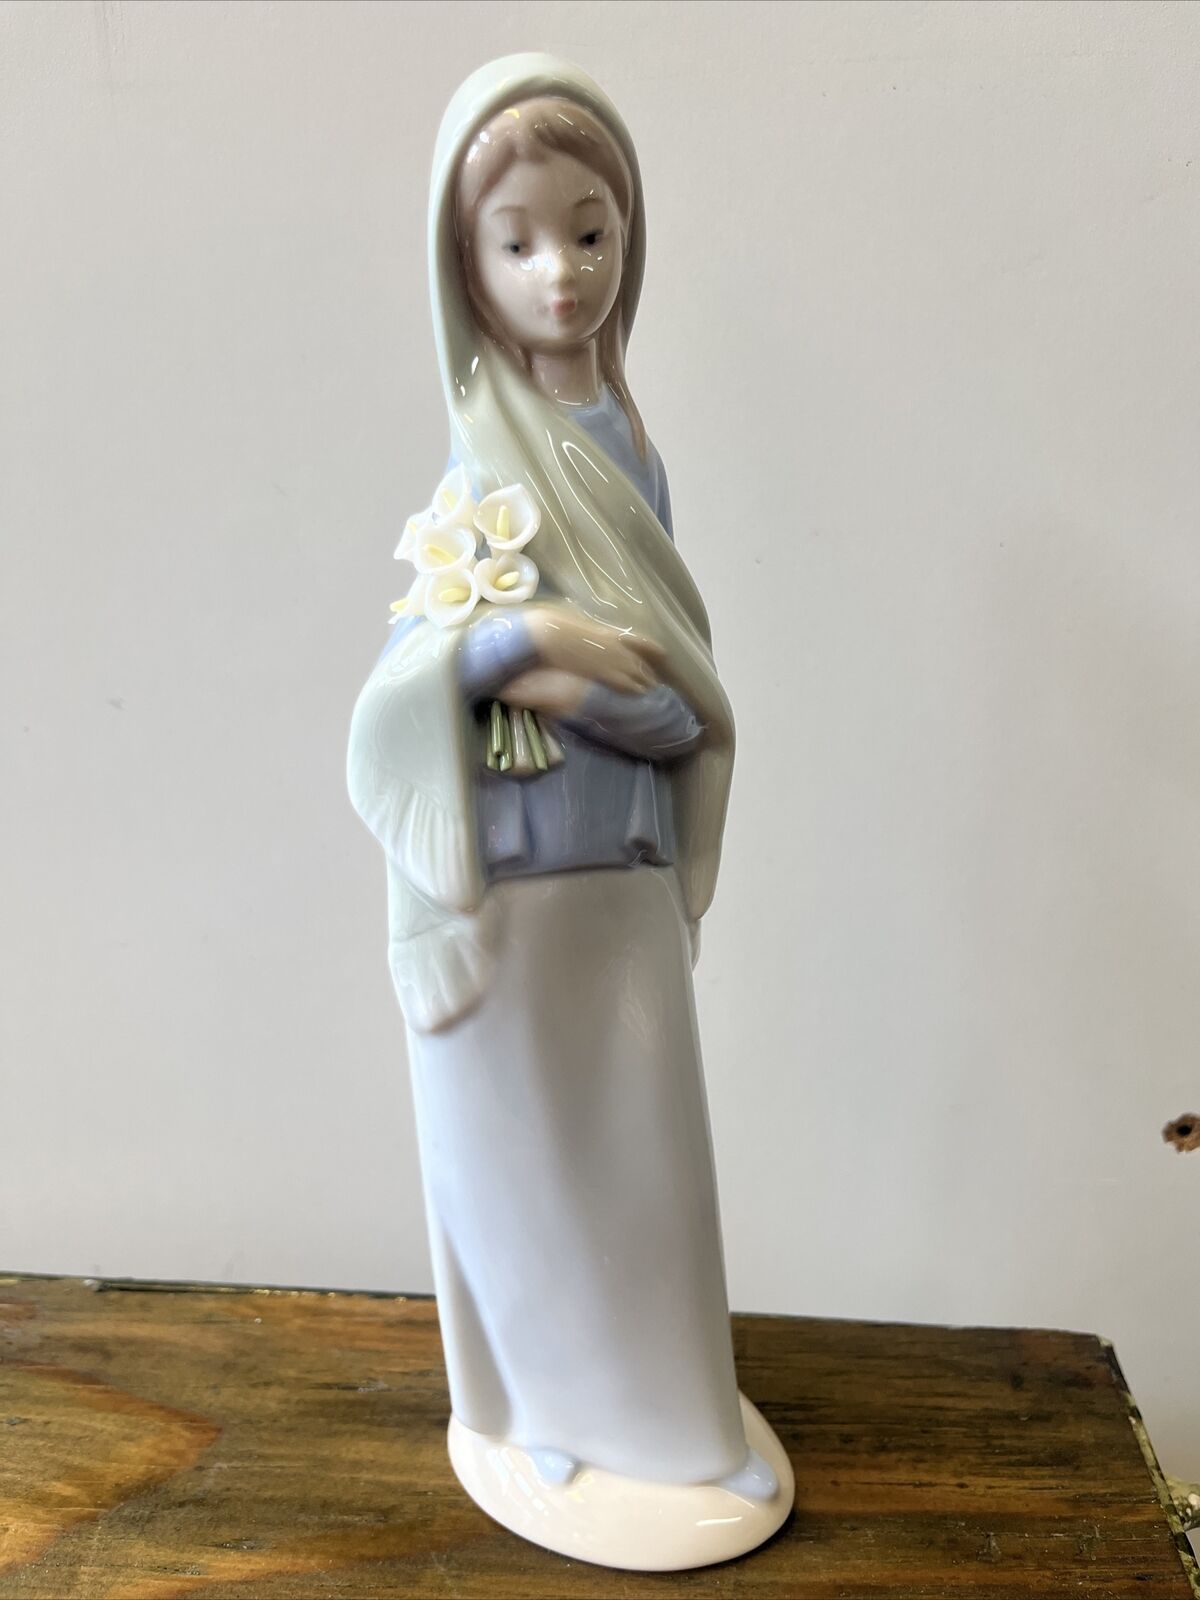 Vintage Spanish Porcelain Lladro 4650 girl w/ calla lily flowers includes box